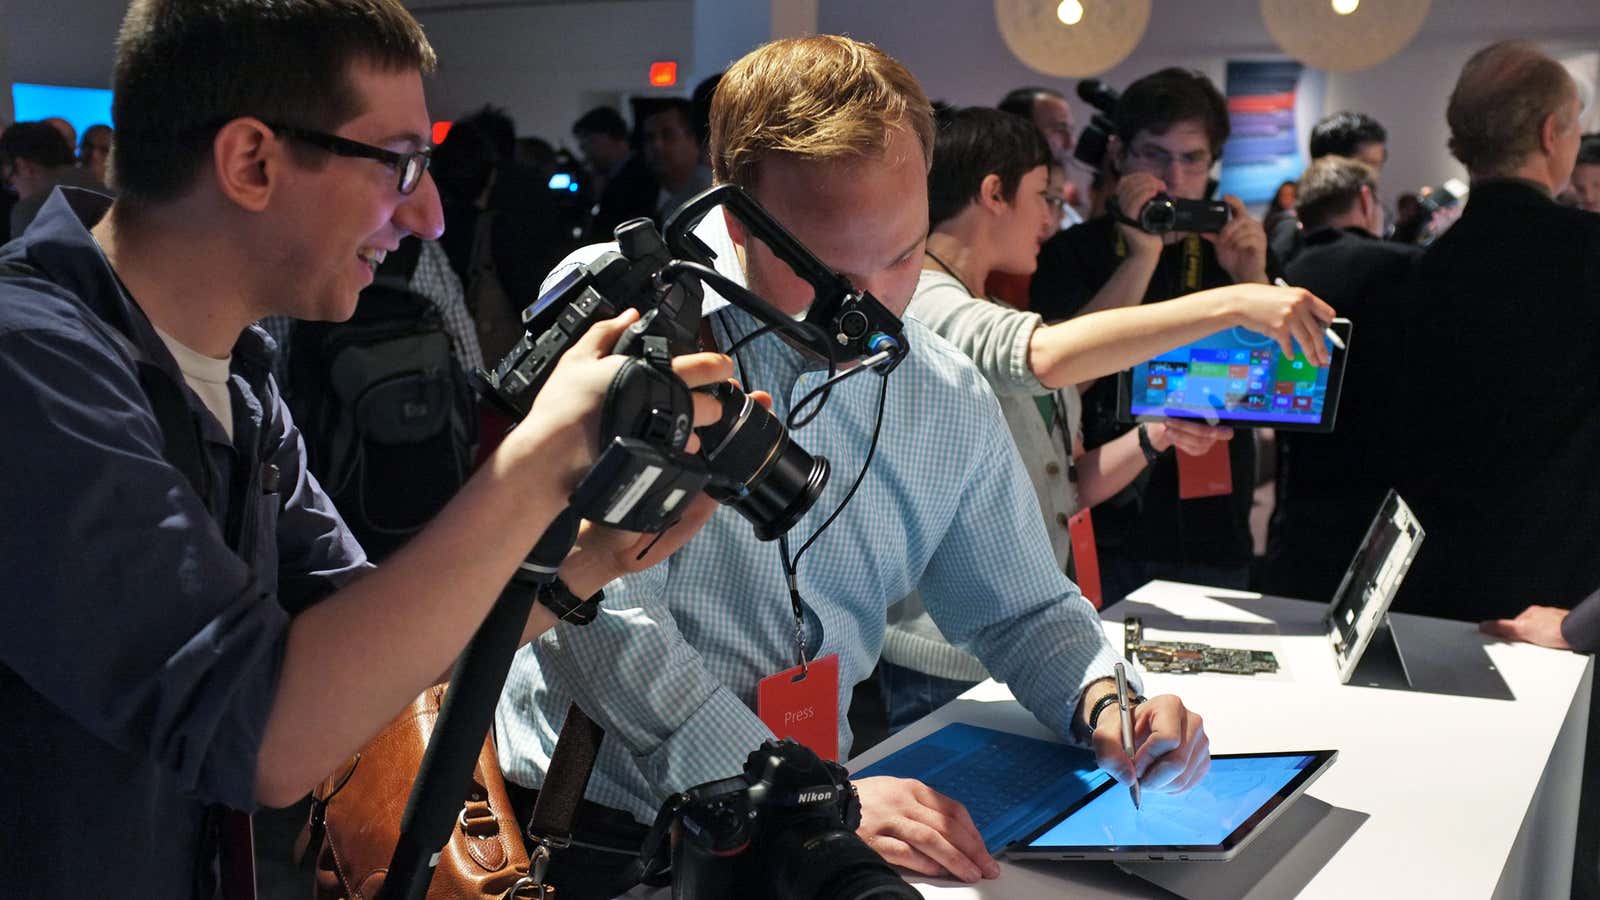 Journalists test Microsoft’s Surface 3 Pro tablet at a launch event in New York, May 20, 2014.